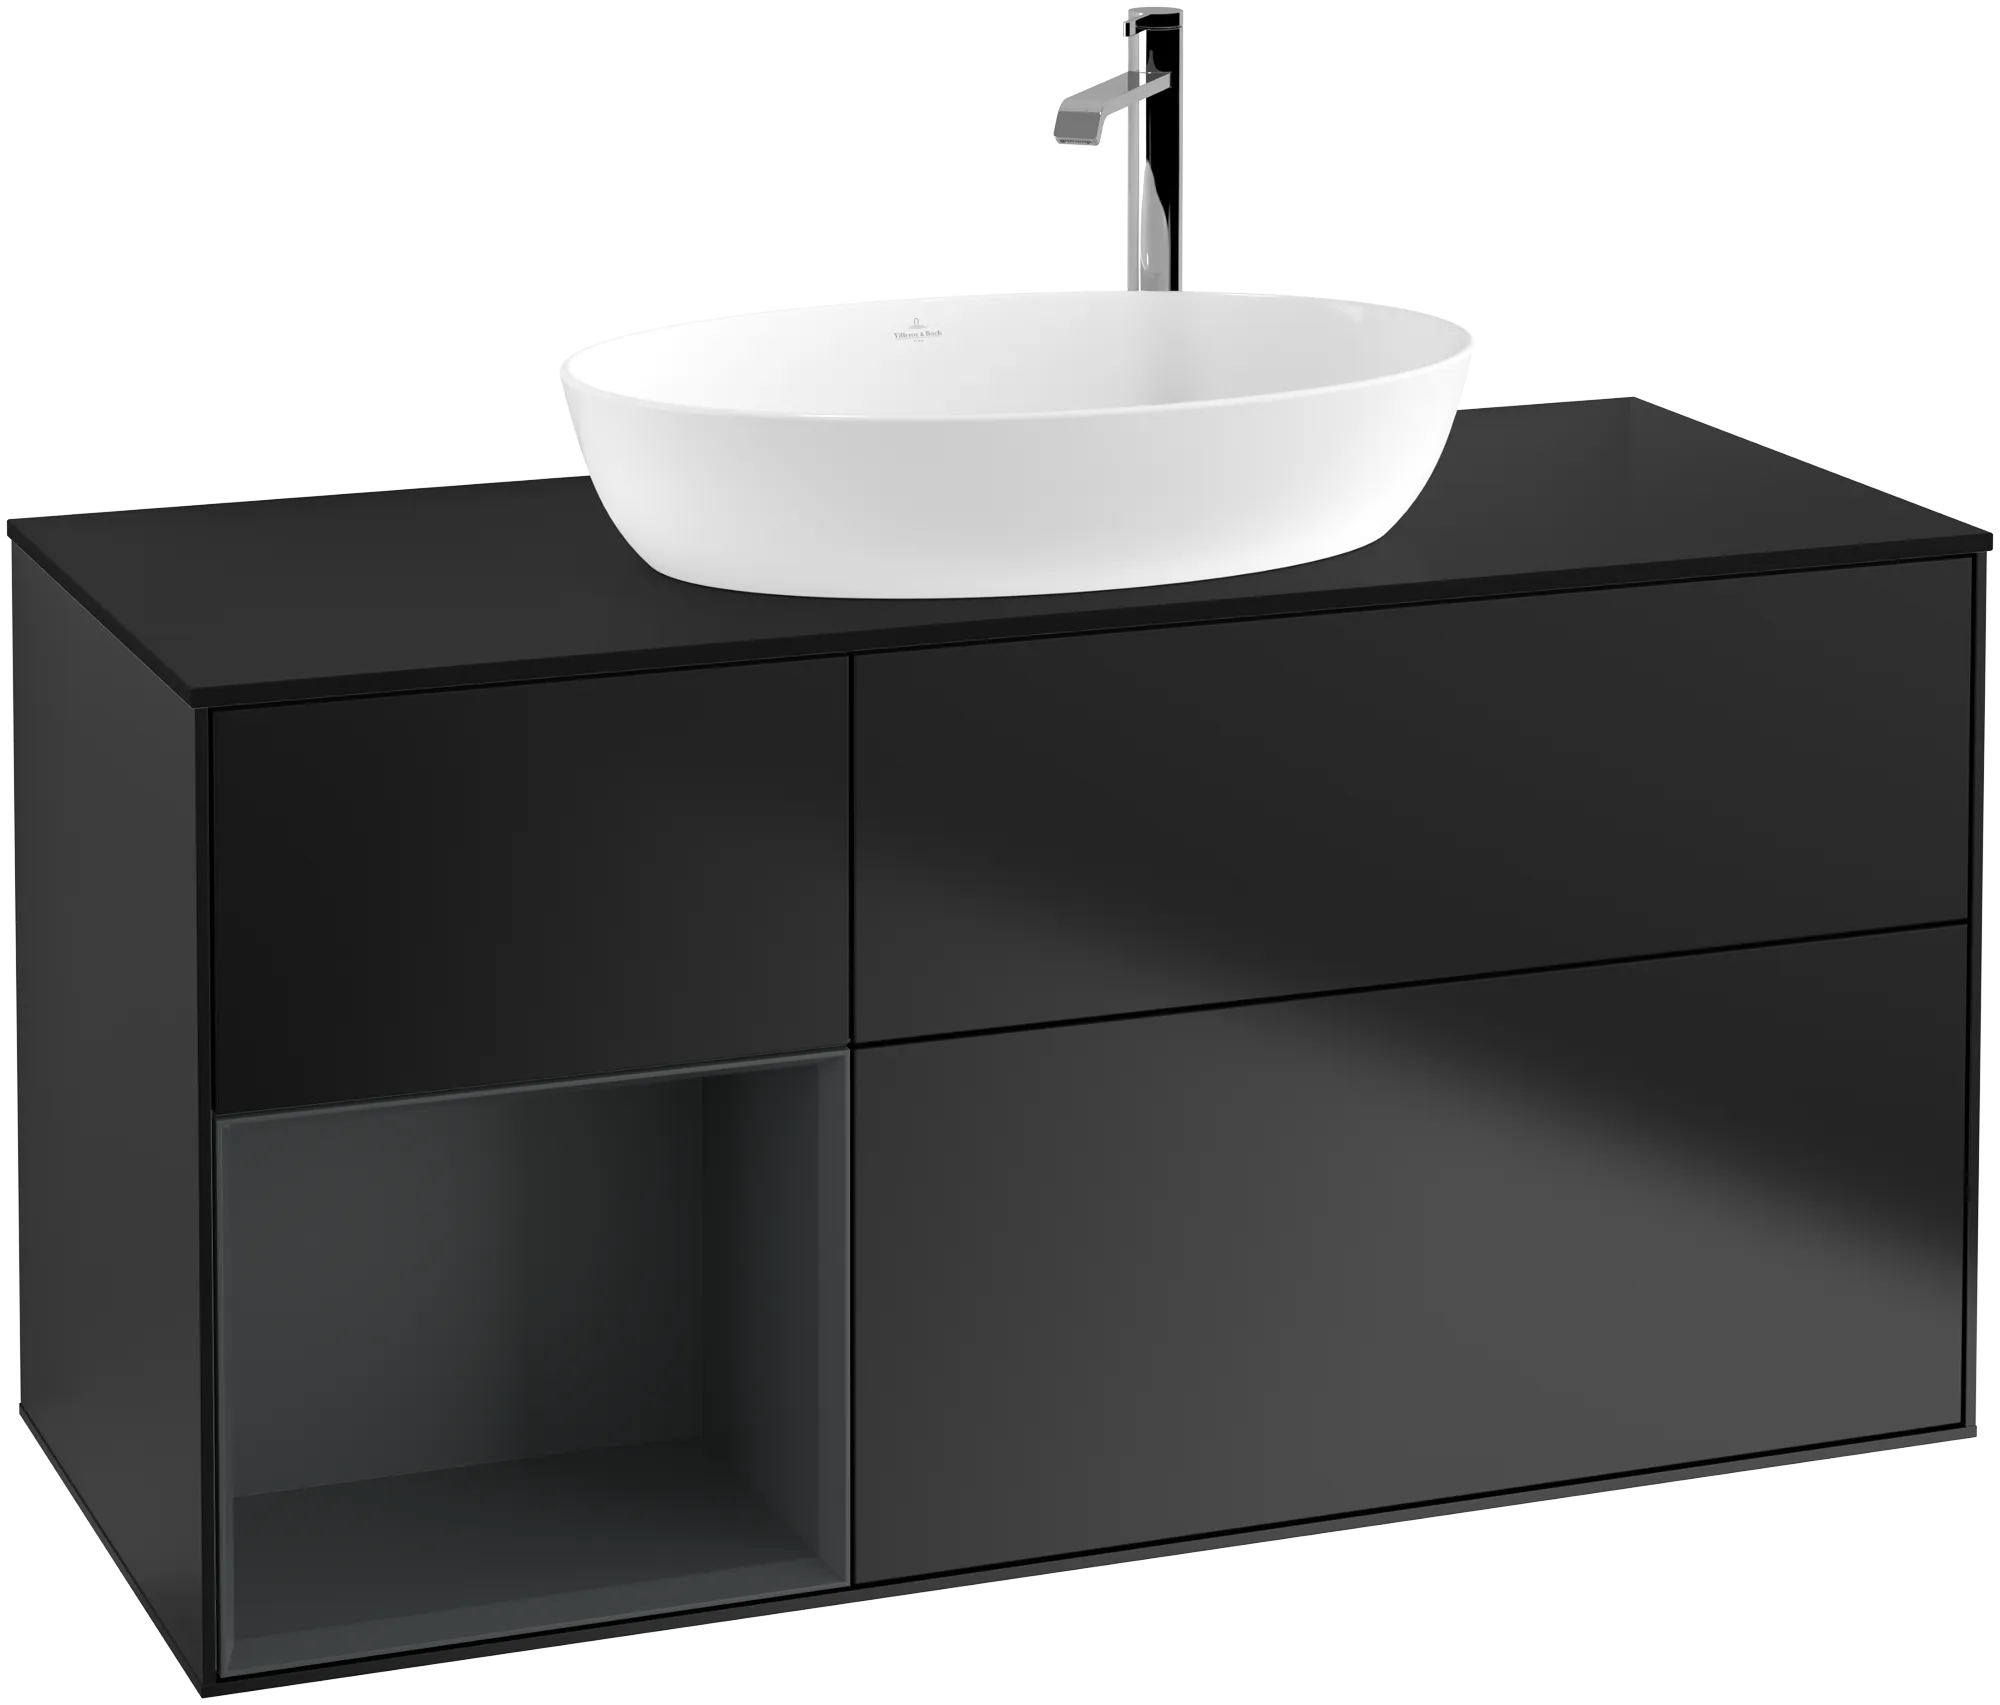 VILLEROY BOCH Finion Vanity unit, with lighting, 3 pull-out compartments, 1200 x 603 x 501 mm, Black Matt Lacquer / Midnight Blue Matt Lacquer / Glass Black Matt #G942HGPD resmi